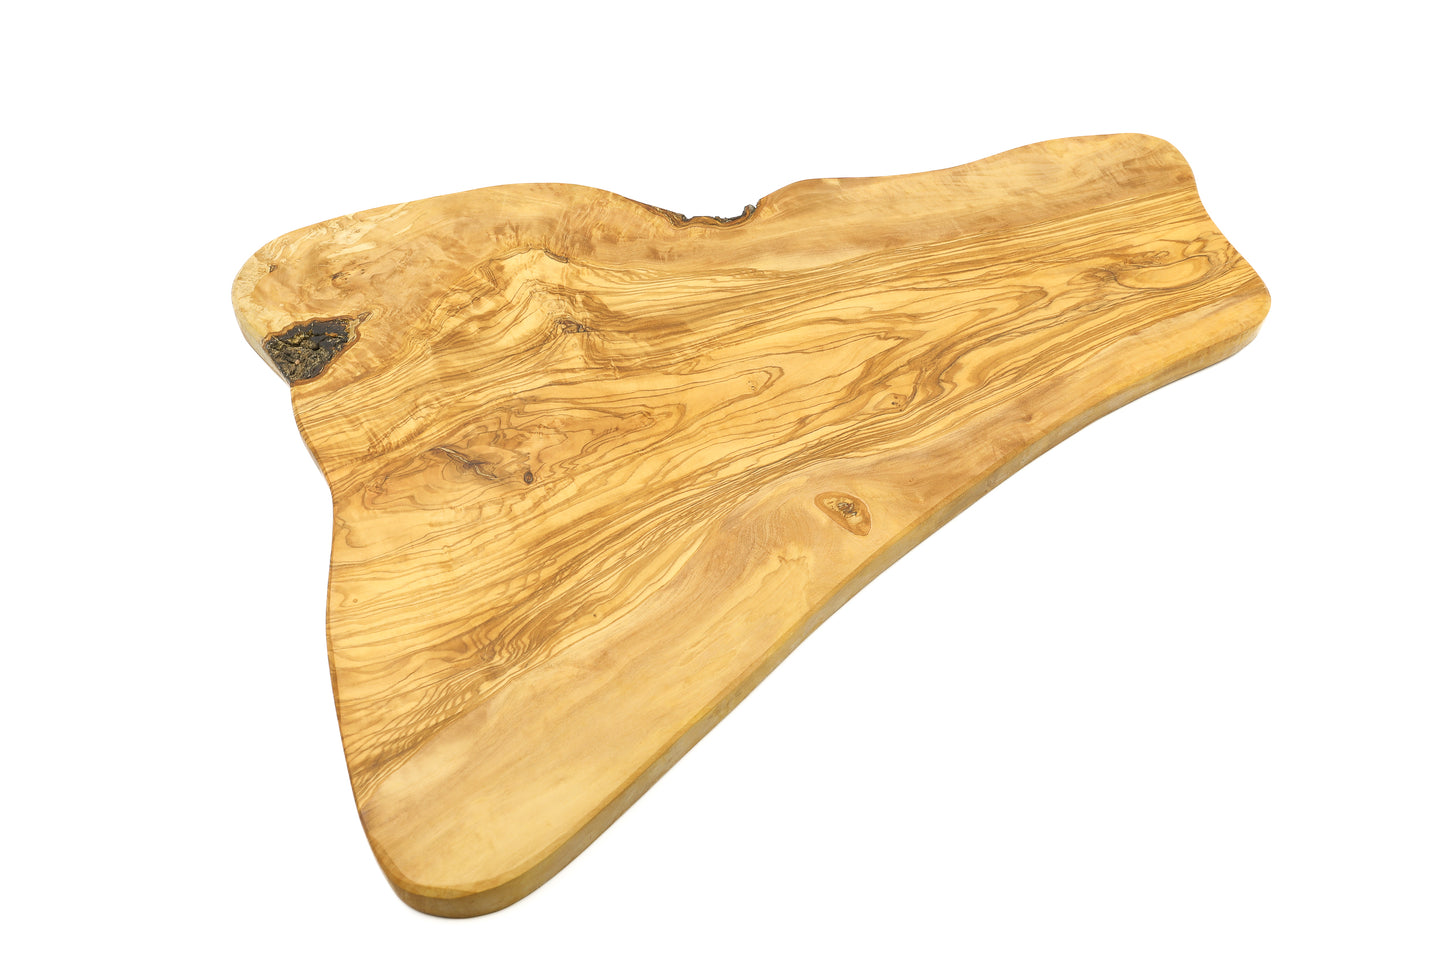 Extra-large olive wood board, ideal for cutting, chopping, and serving